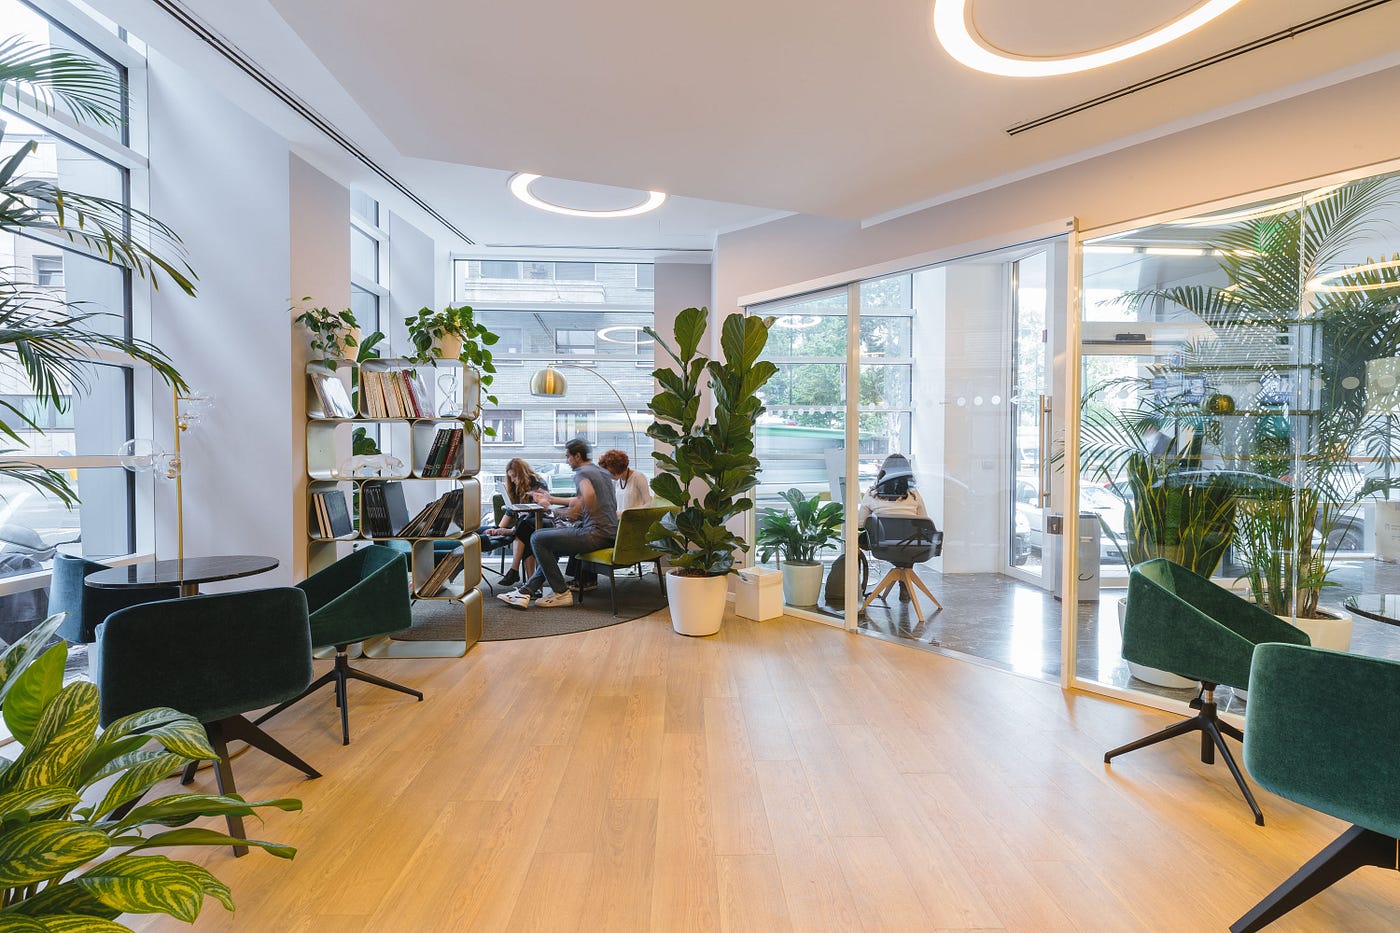 Guide to Designing a Creative Office Space